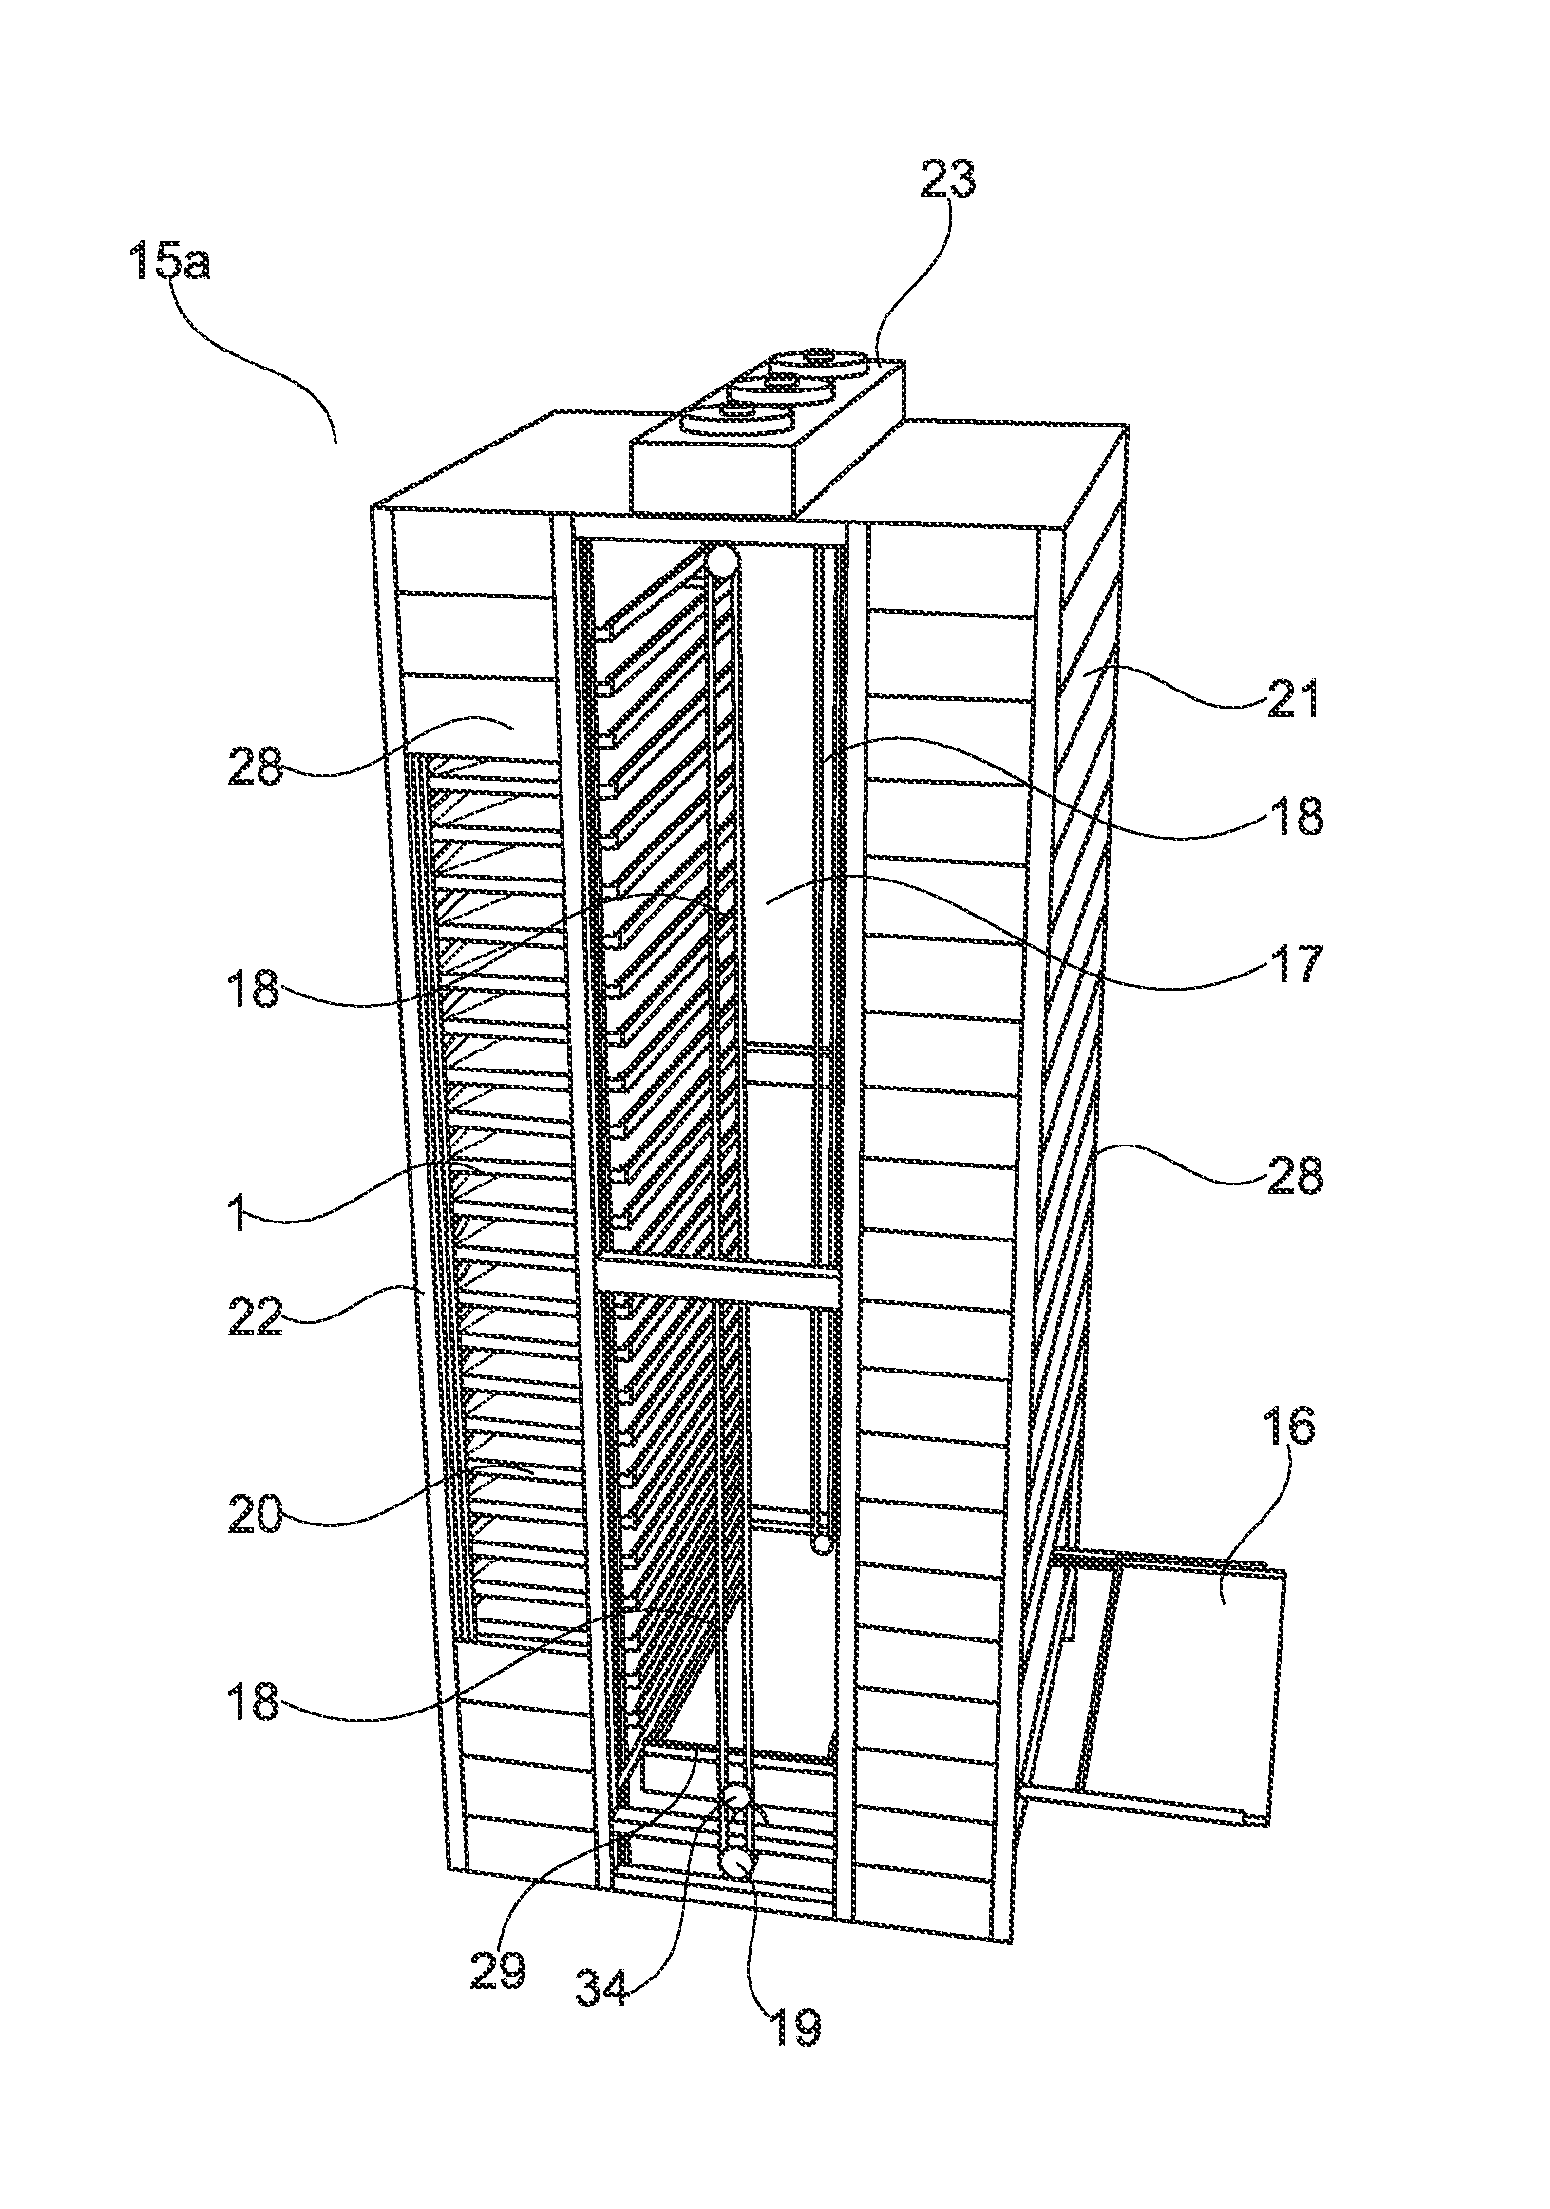 Automatic Tower with Many Novel Applications